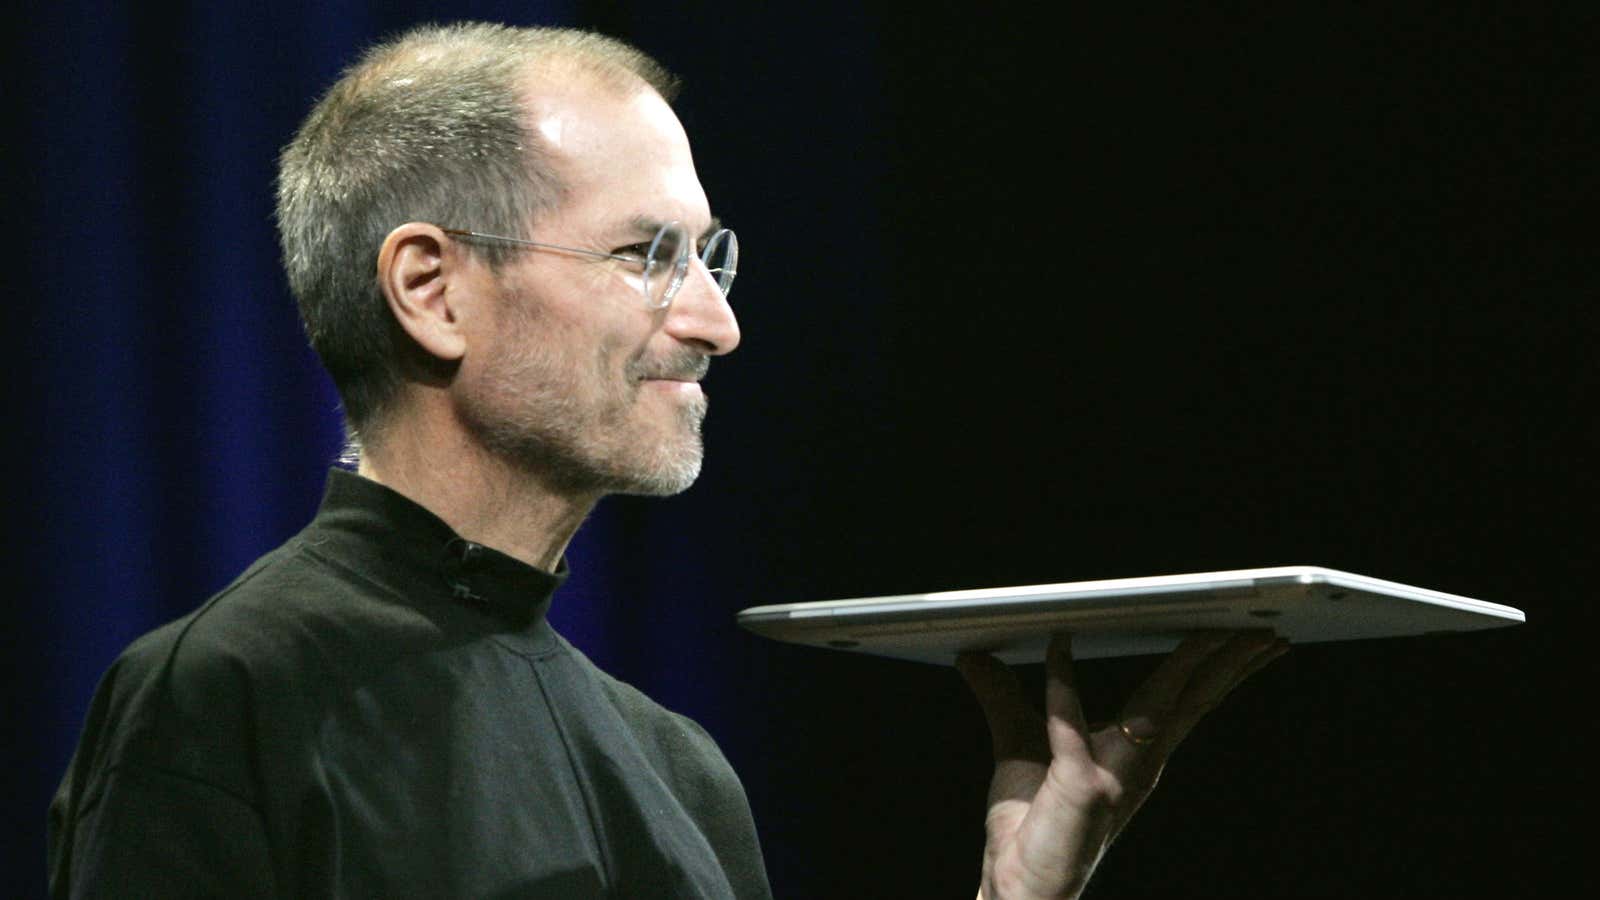 “Working for Steve Jobs wasn’t easy, and it wasn’t pleasant.”